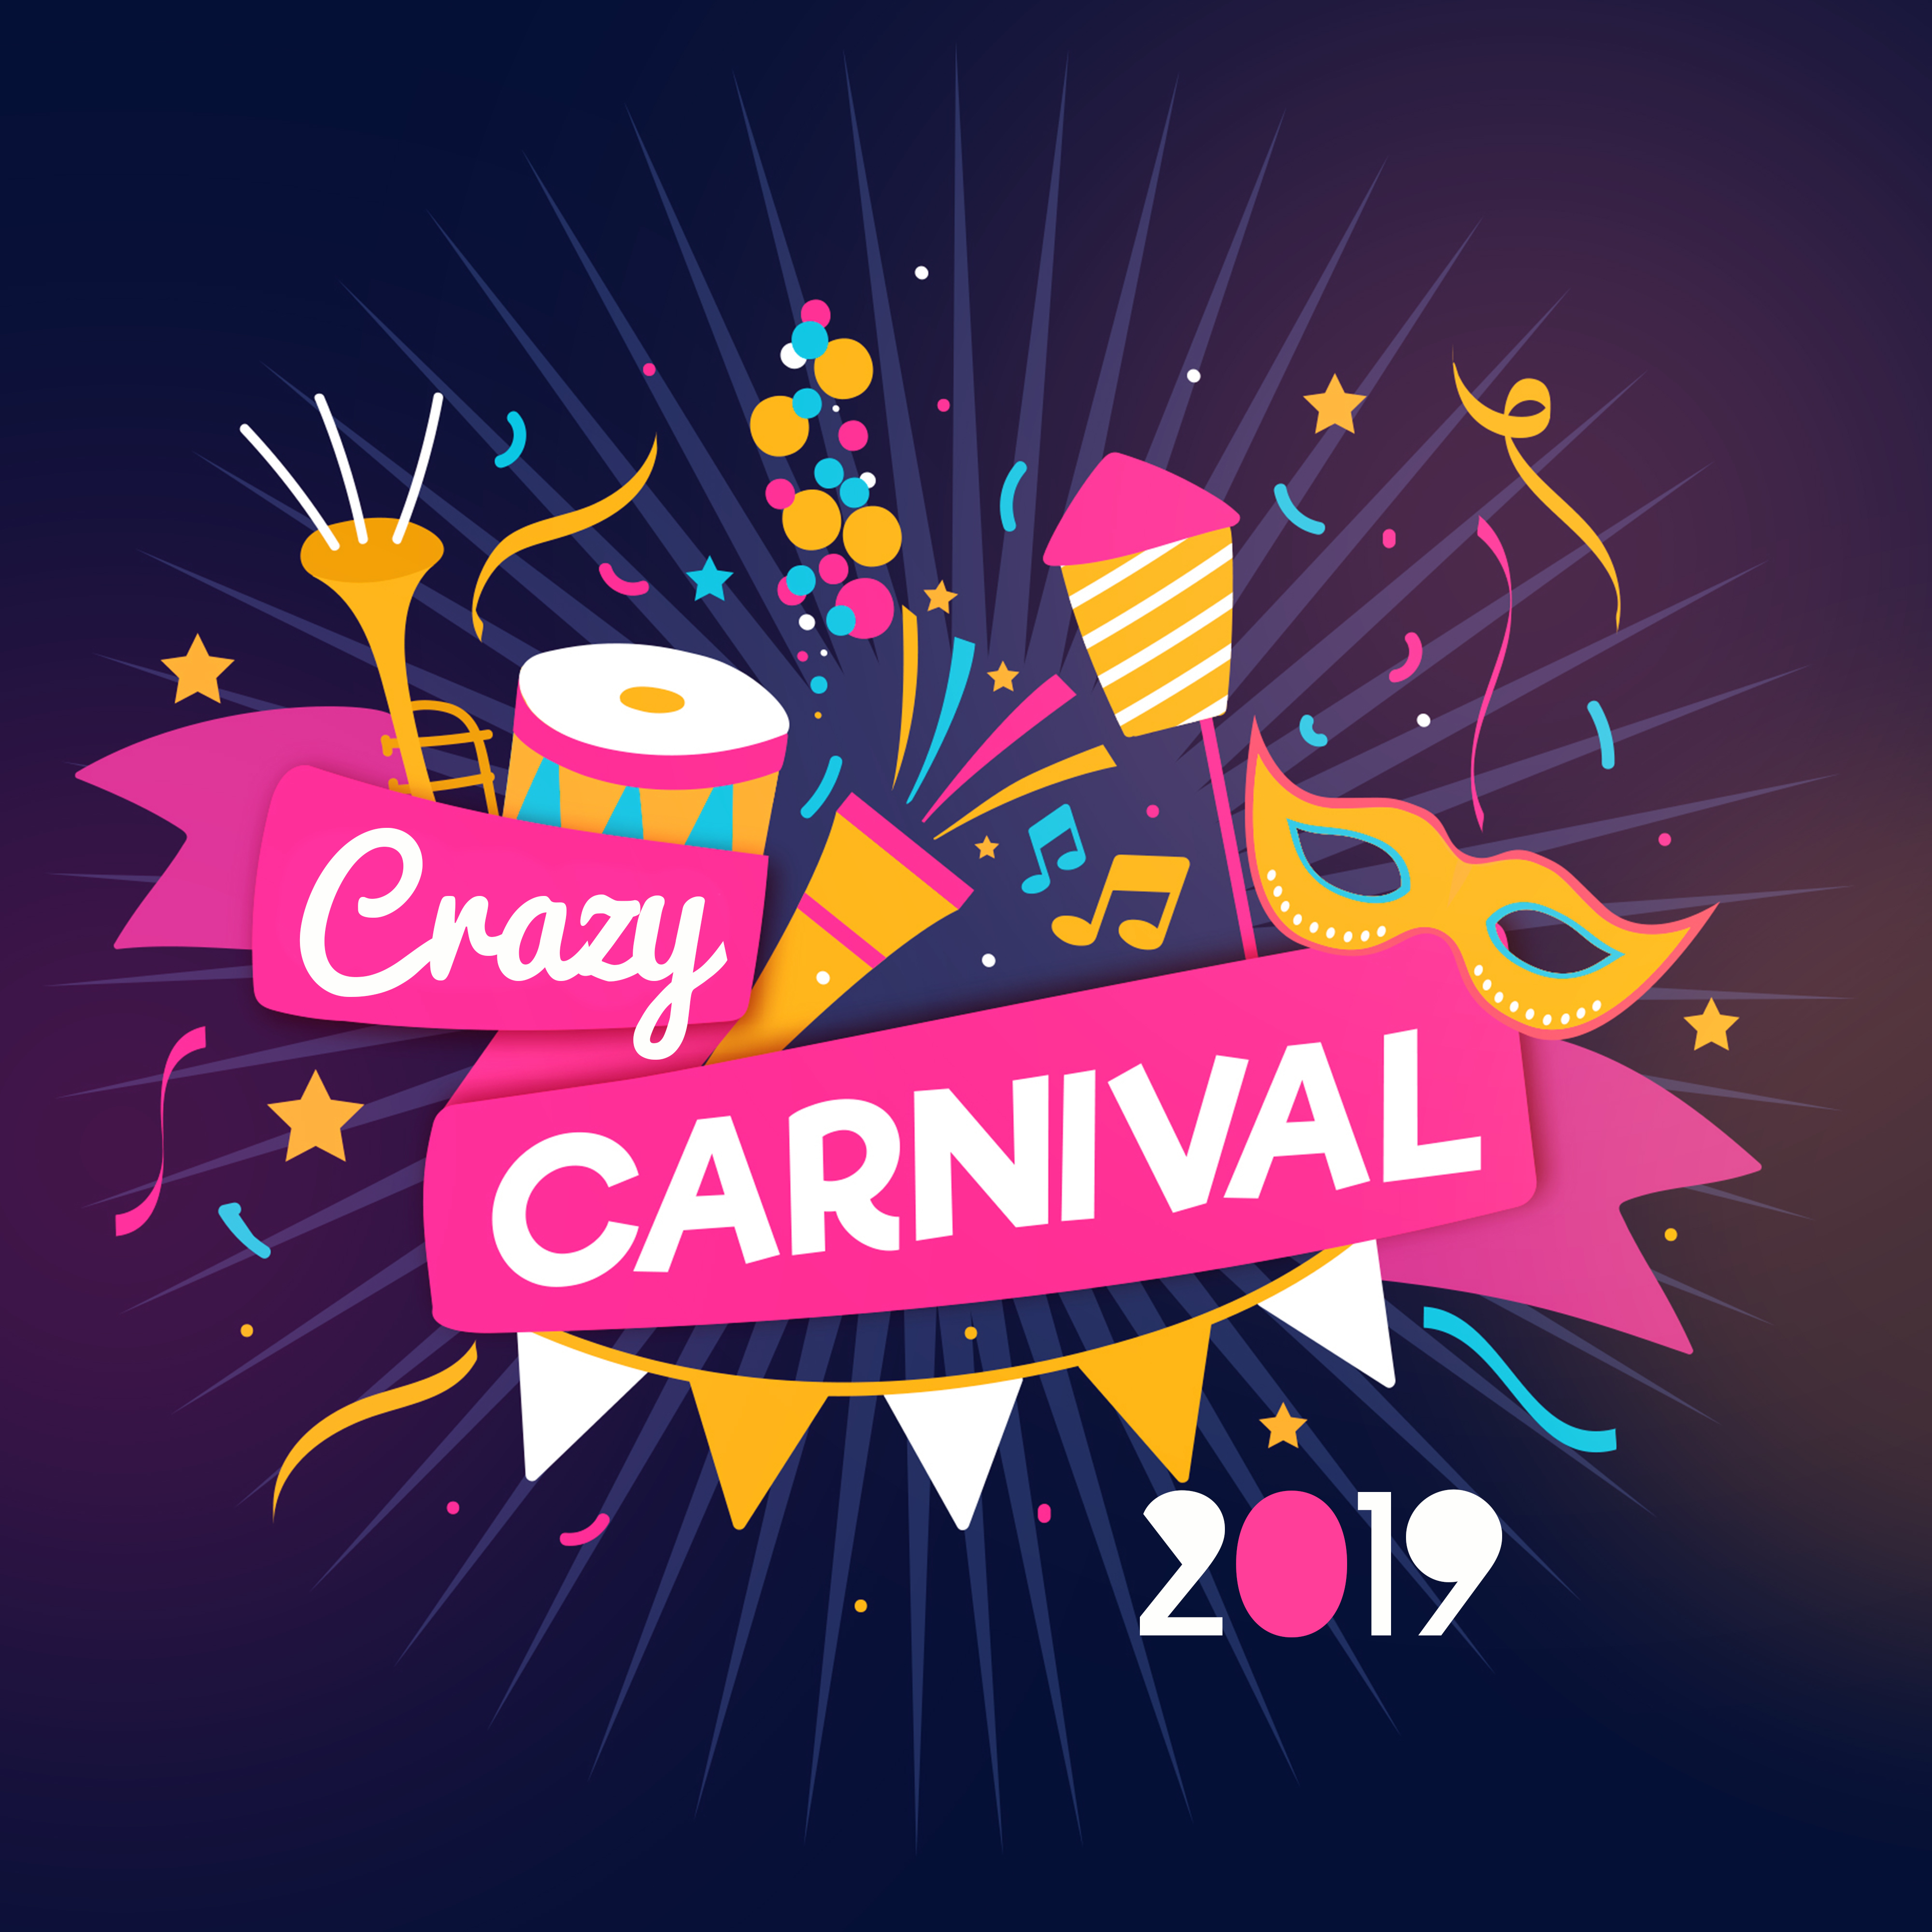 Crazy Carnival 2019 – **** Vibrations, Dance Music, Party Hits, Deep Carnival Beats, Chillout 2019